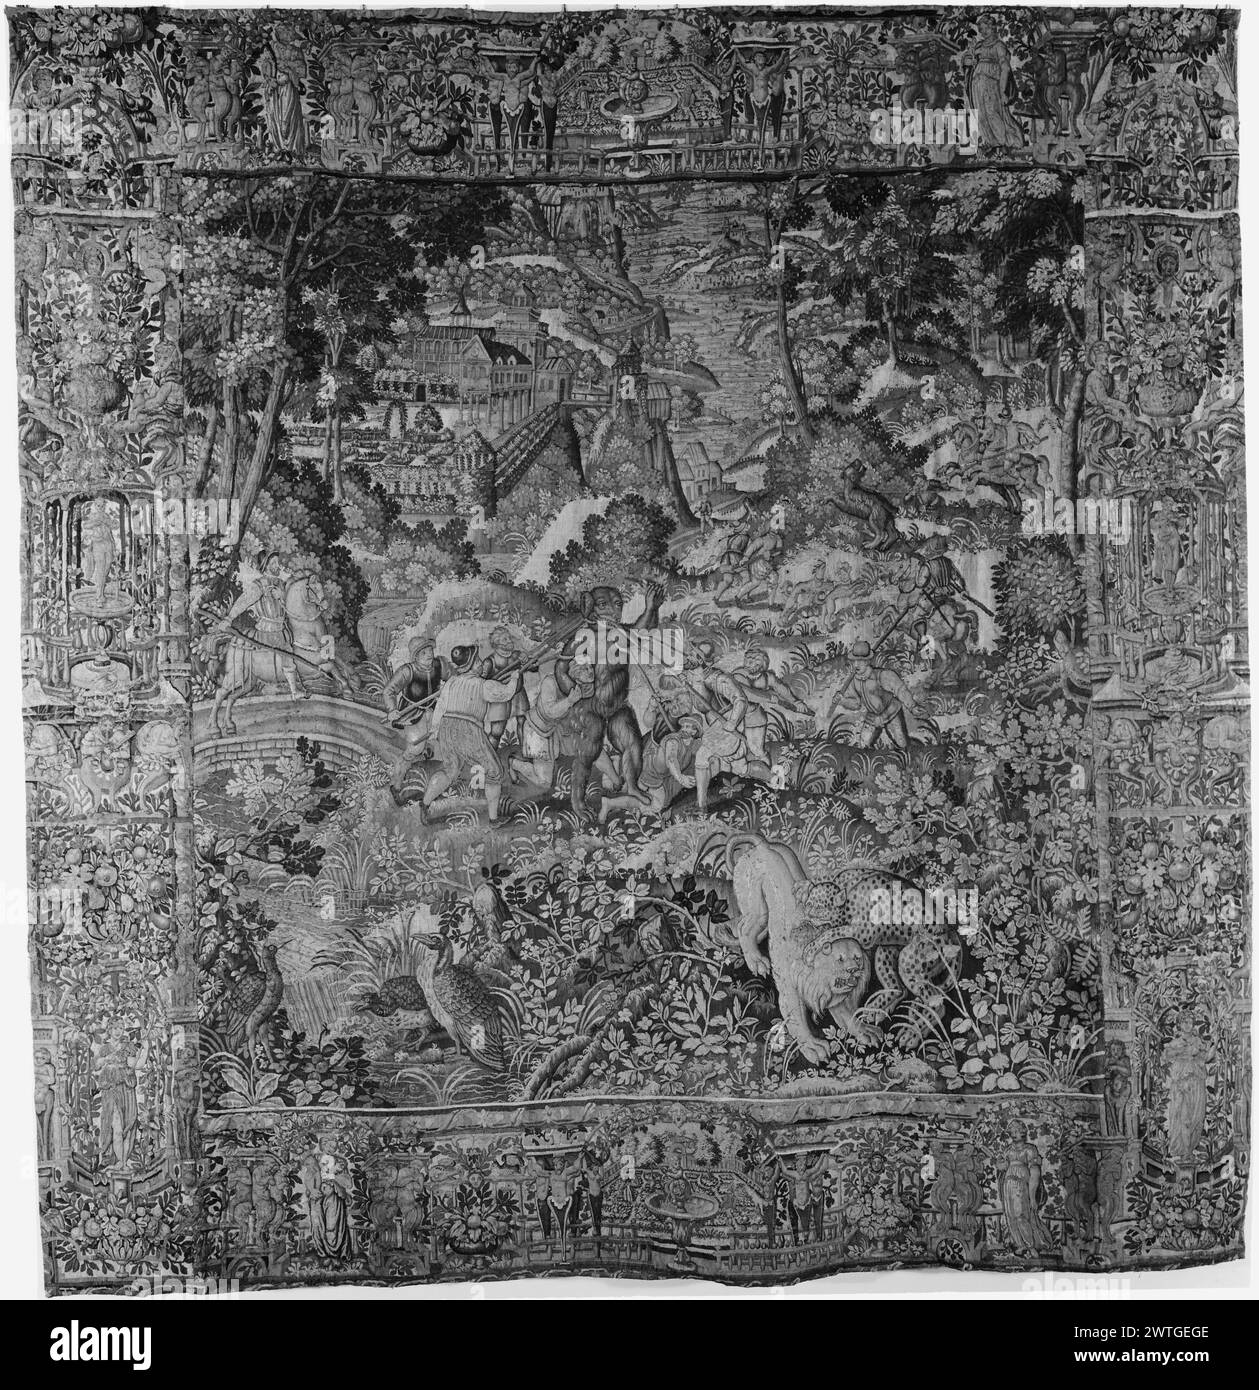 Game park with bear hunt. unknown c. 1580-1600 Tapestry Dimensions: H 11'2' x W 10'6' Tapestry Materials/Techniques: unknown Culture: Flemish Weaving Center: Brussels Ownership History: French & Co. purchased with 1/2 interest with Charles, 11/21/1919; sold at Charles auction sale # 705 11/26/1920 [SS 7571-98]. French & Co. purchased from American Art Association (Charles) 11/17/1920; sold to Miss B. Skinner 2/25/1926 [SS 22989]. French & Co. purchased from James Graham & Sons, received 5/25/1959; sold to V & C [Vigo & Charles] Sternberg 1/20/1962. [SS B-679]. Birds next to stream; leopard att Stock Photo